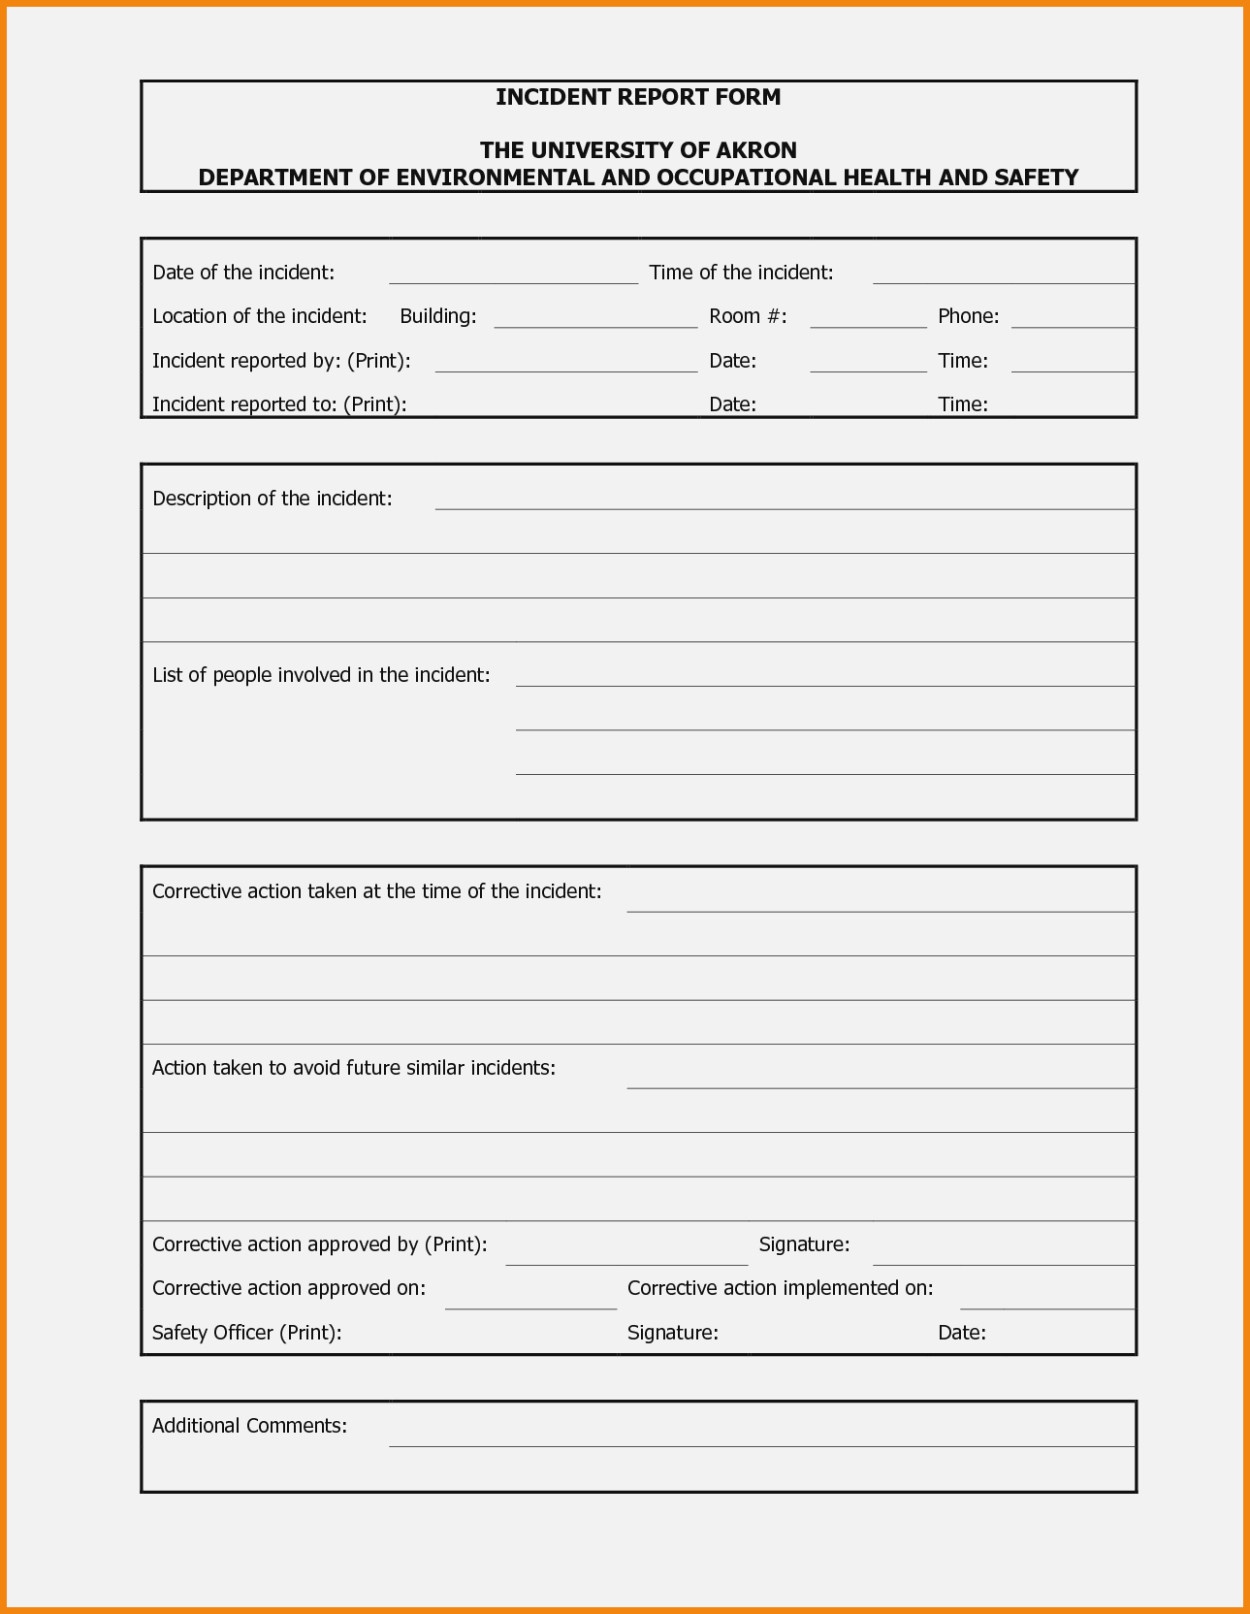 14 Things You Most Likely | Realty Executives Mi : Invoice And - Free Printable Incident Report Form